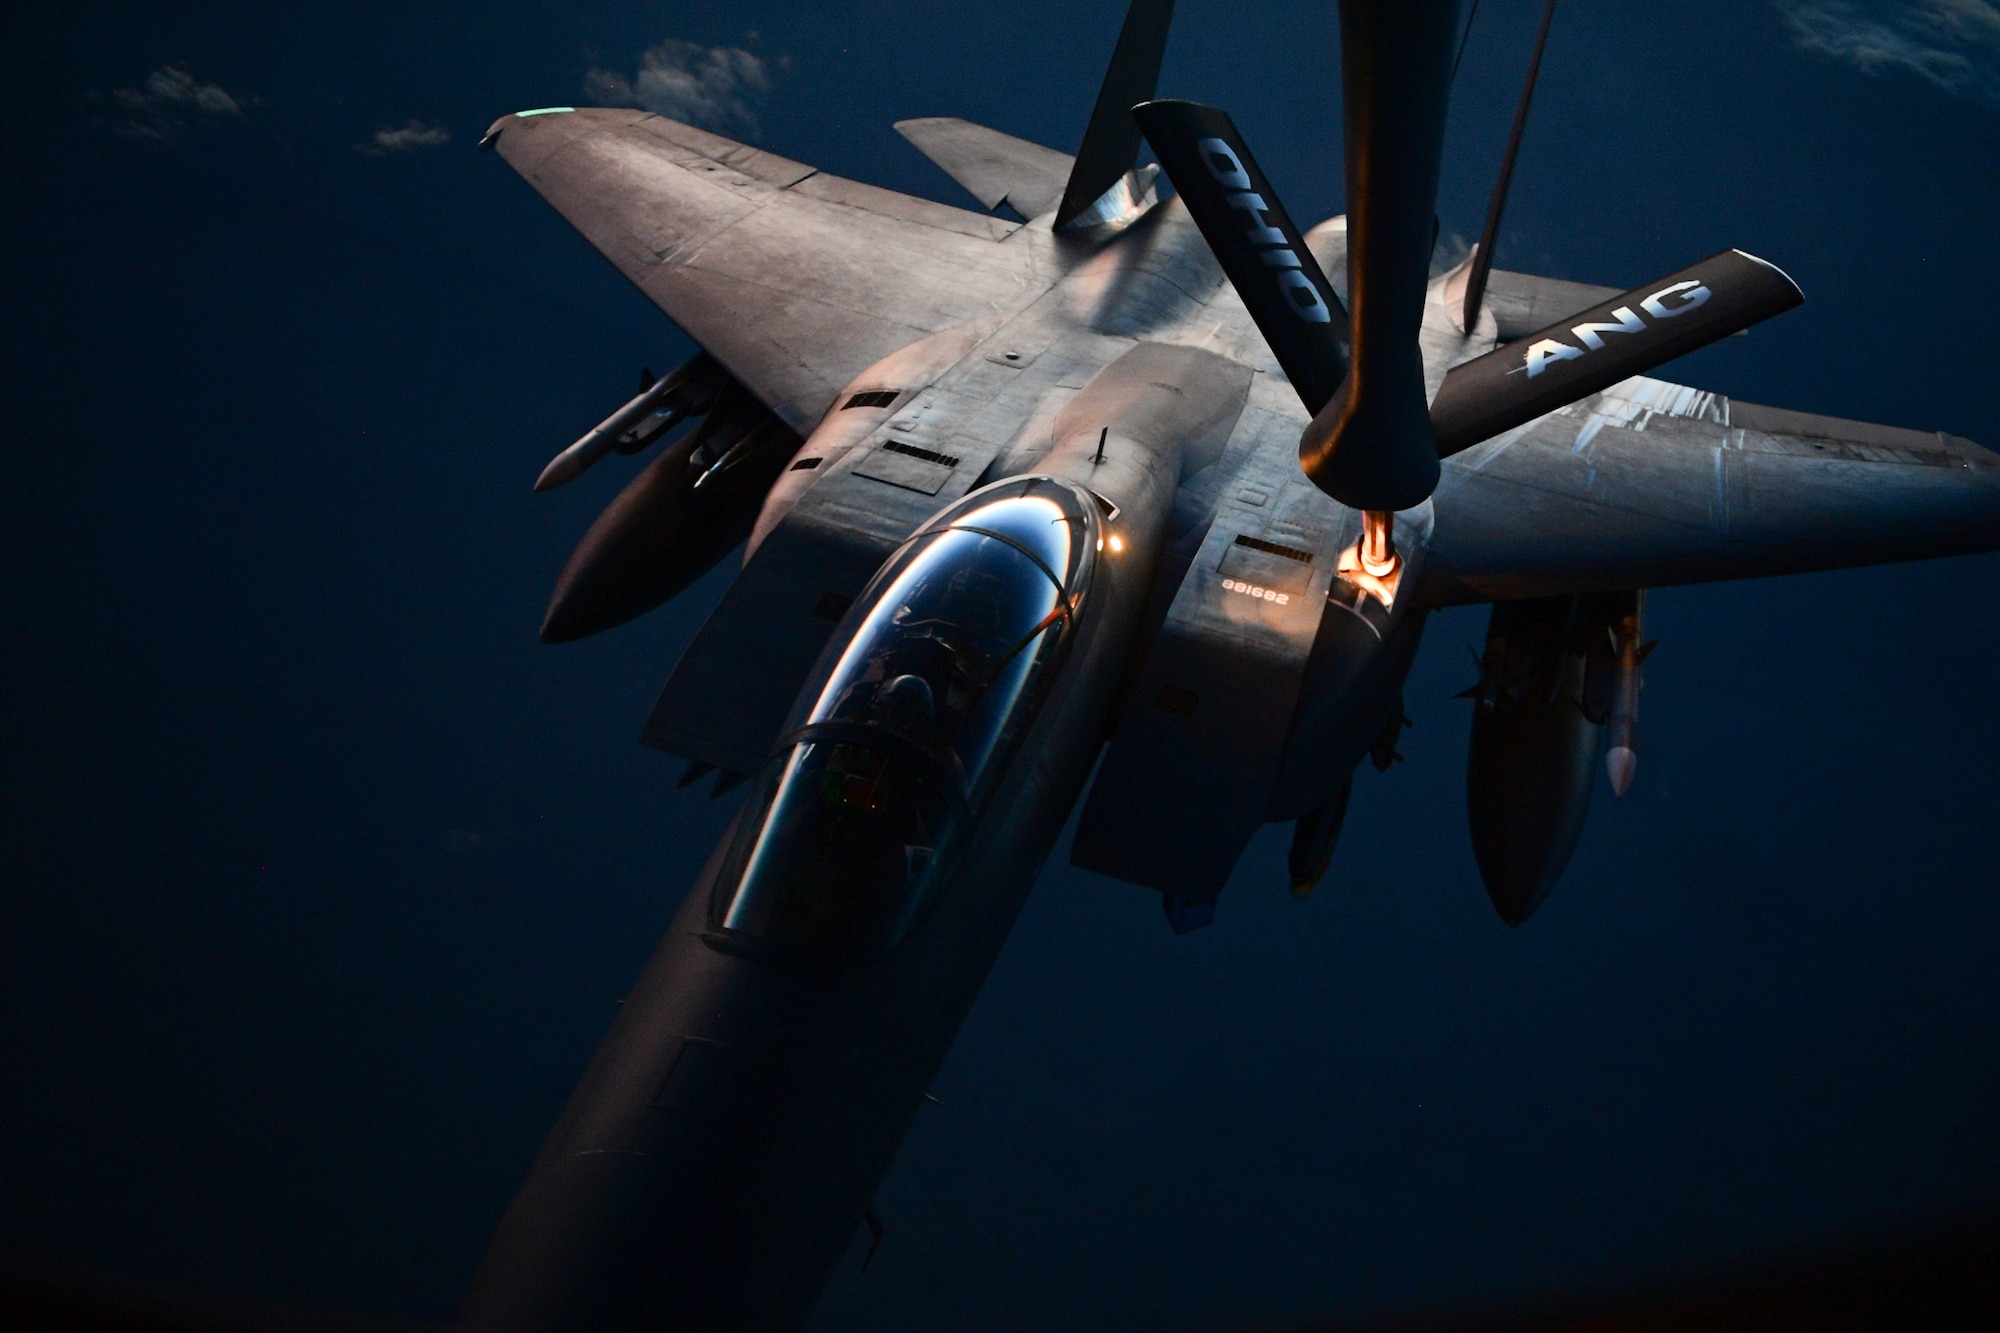 A U.S. Air Force F-15 Eagle receives fuel from a KC-135 Stratotanker assigned to the 340th Expeditionary Air Refueling Squadron during a refueling mission above Iraq March 16, 2018. The 340th EARS is assigned to the 379th Expeditionary Operations Group and supports various operations in countries such as Iraq, Syria and Afghanistan. (U.S. Air Force Photo by Tech. Sgt. Paul Labbe)